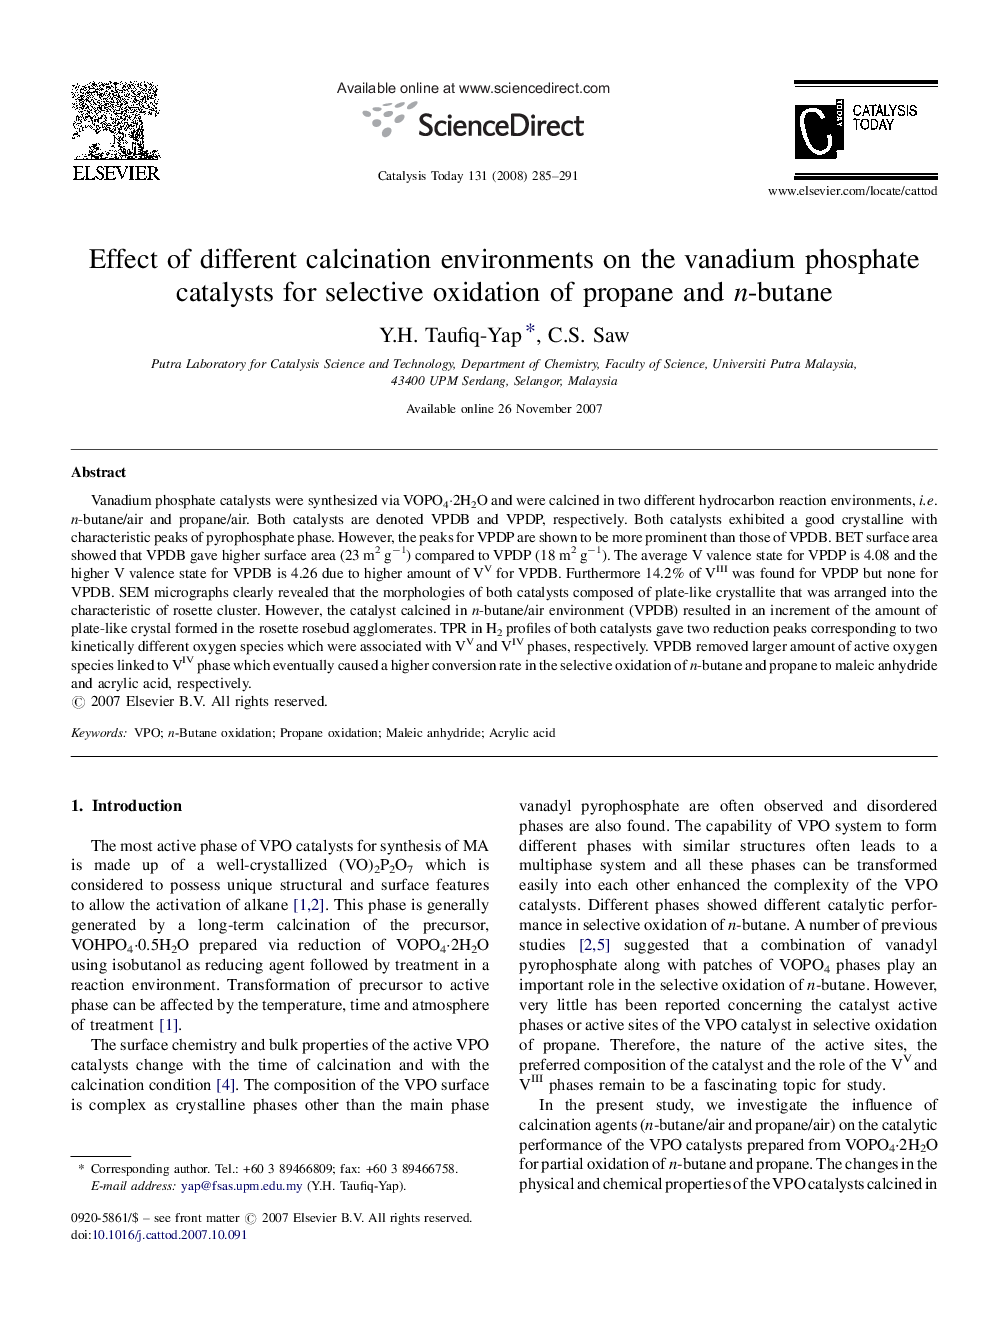 Effect of different calcination environments on the vanadium phosphate catalysts for selective oxidation of propane and n-butane